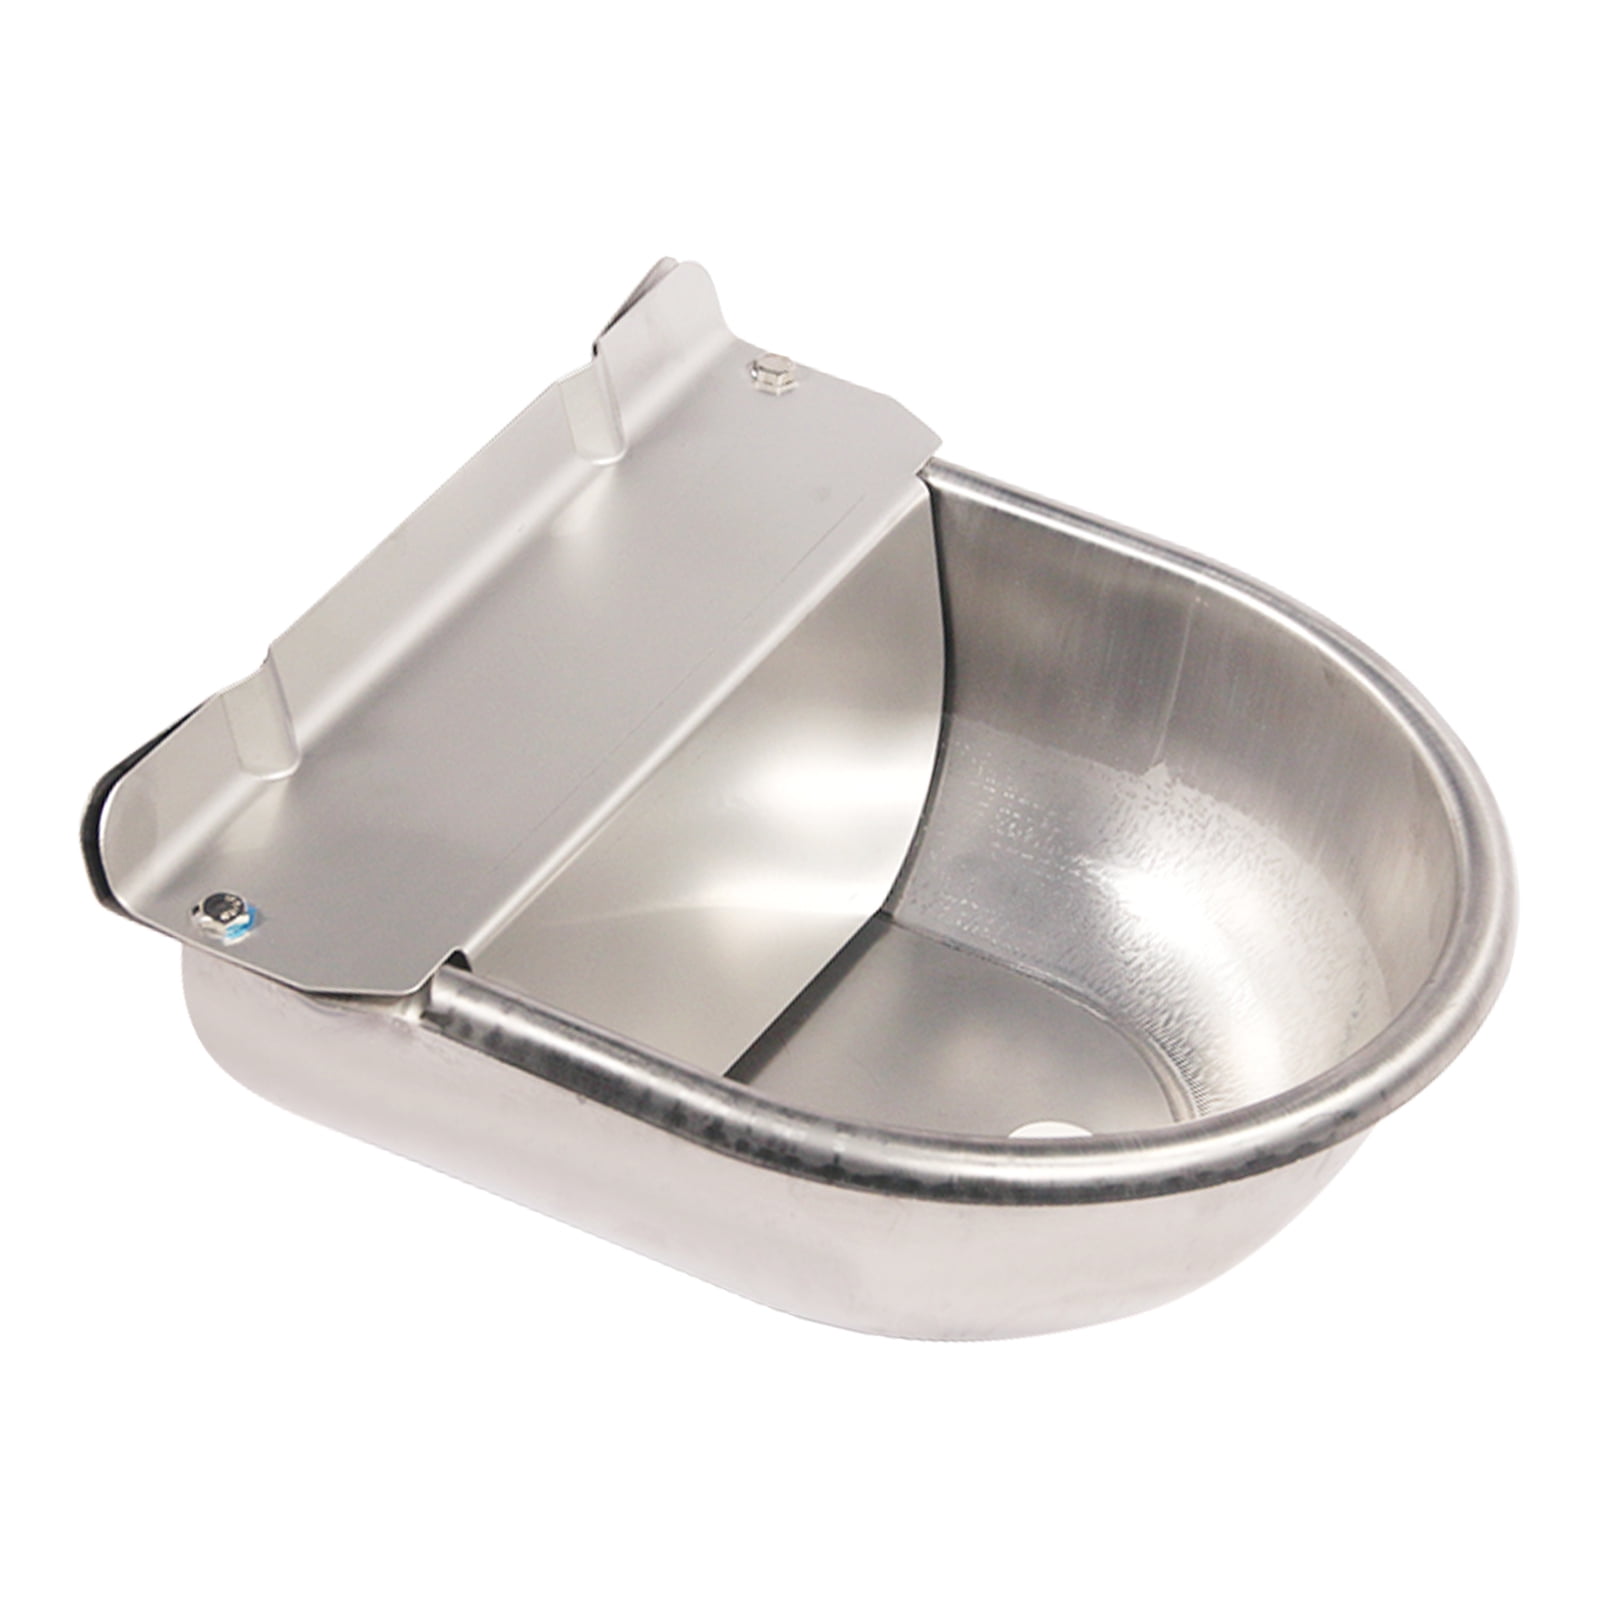 Auto Float Water Bowl Water Trough for Livestock Dog Goat Pig Waterer MACGOAL Stainless Steel Automatic Waterer Bowl with Brass Float Valve and Drain Plug 